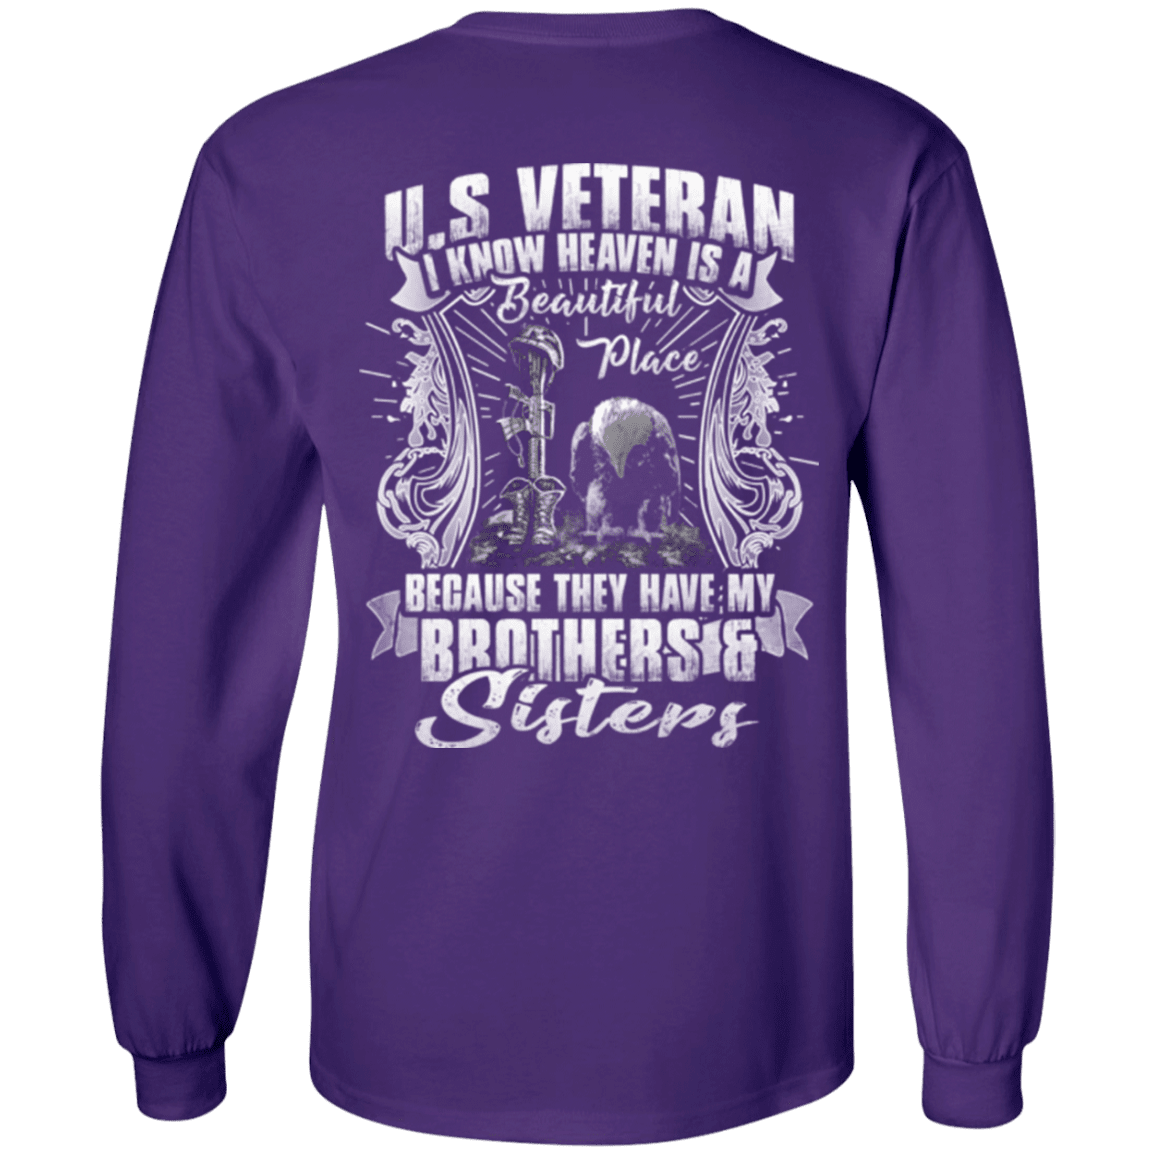 Military T-Shirt "Heaven Is The Beautiful Place With Brothers And Sisters Veteran"-TShirt-General-Veterans Nation